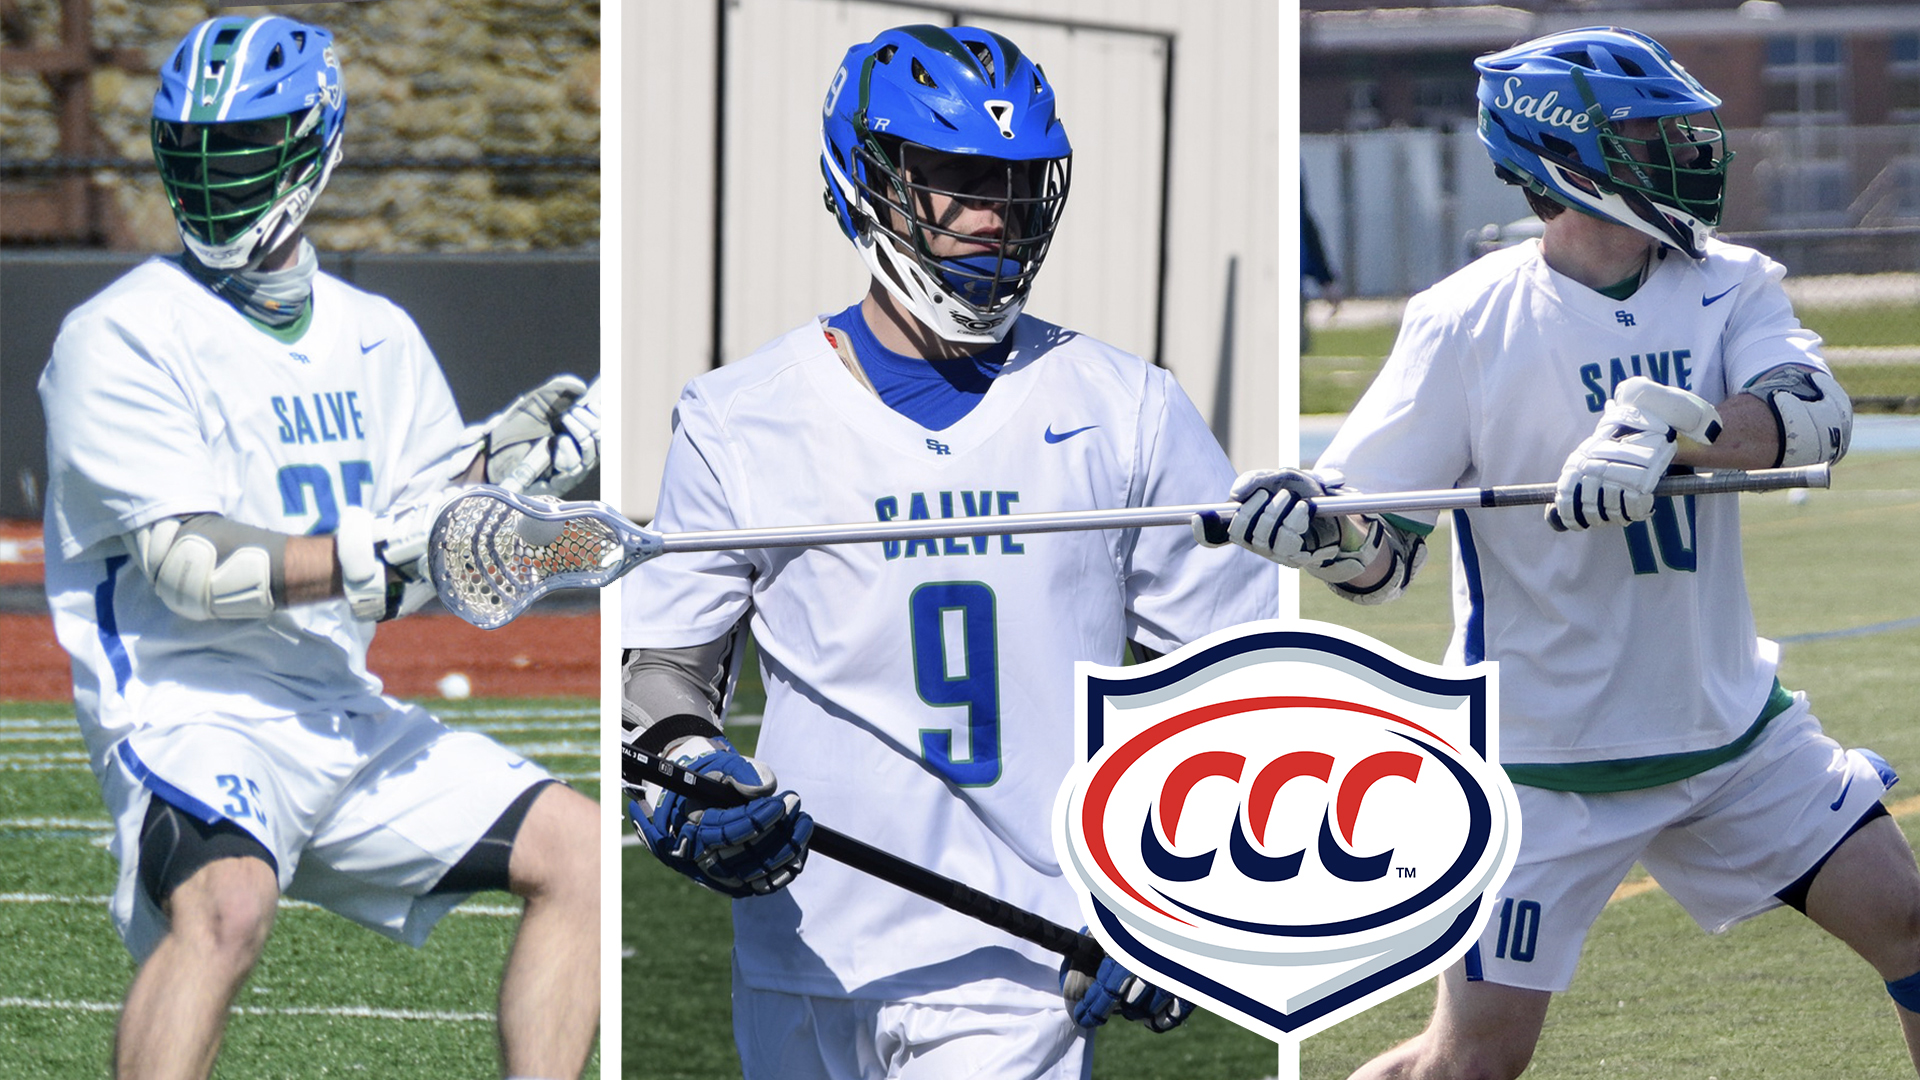 Ethan Robson, Pat Leary, and Marco Mongelli earned All-CCC honors.